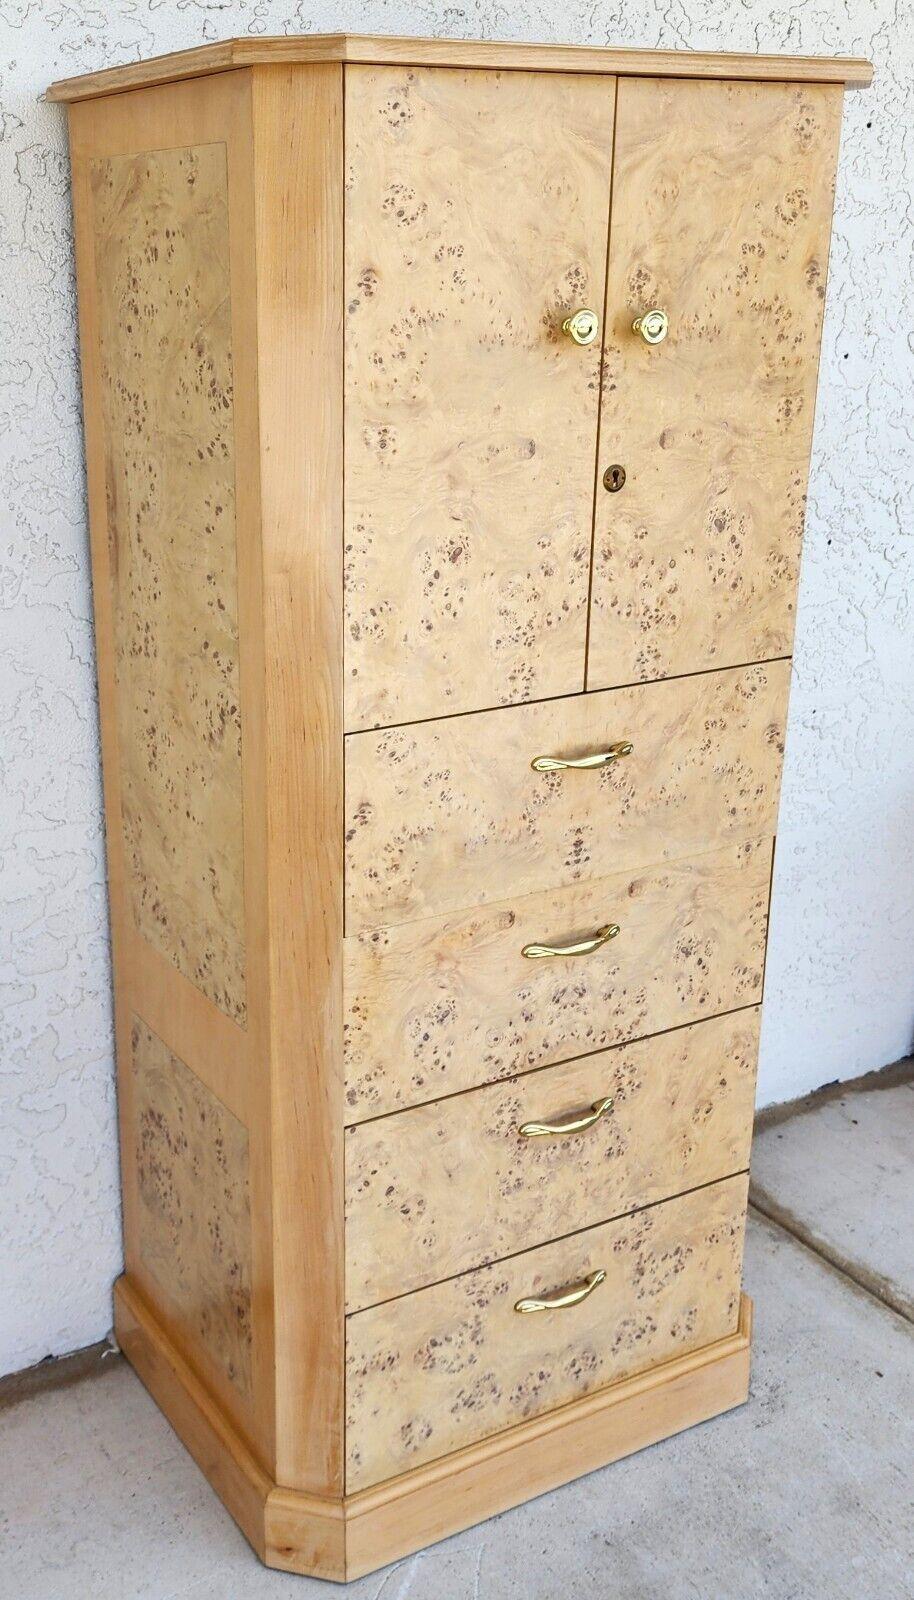 For FULL item description click on CONTINUE READING at the bottom of this page.

Offering One Of Our Recent Palm Beach Estate Fine Furniture Acquisitions Of A
Jewelry Lingerie Chest Semainier in the Drexel Heritage Corinthian Style
This is a very